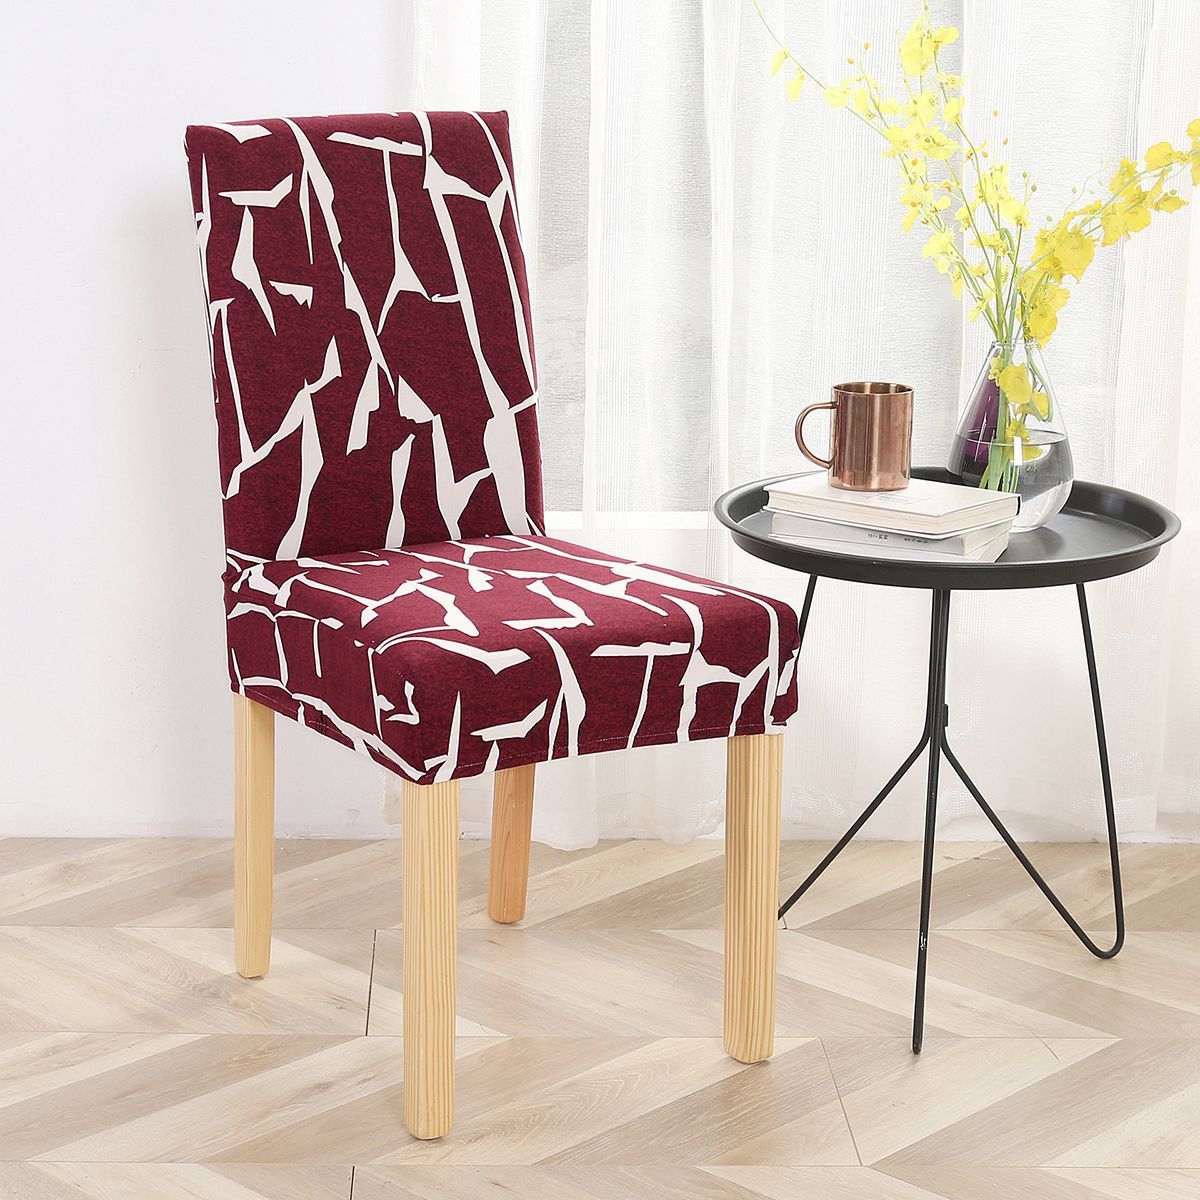 Universal-Chair-Covers-Printing-Floral-Stretch-Spandex-Chair-Protector-Slip-1645200